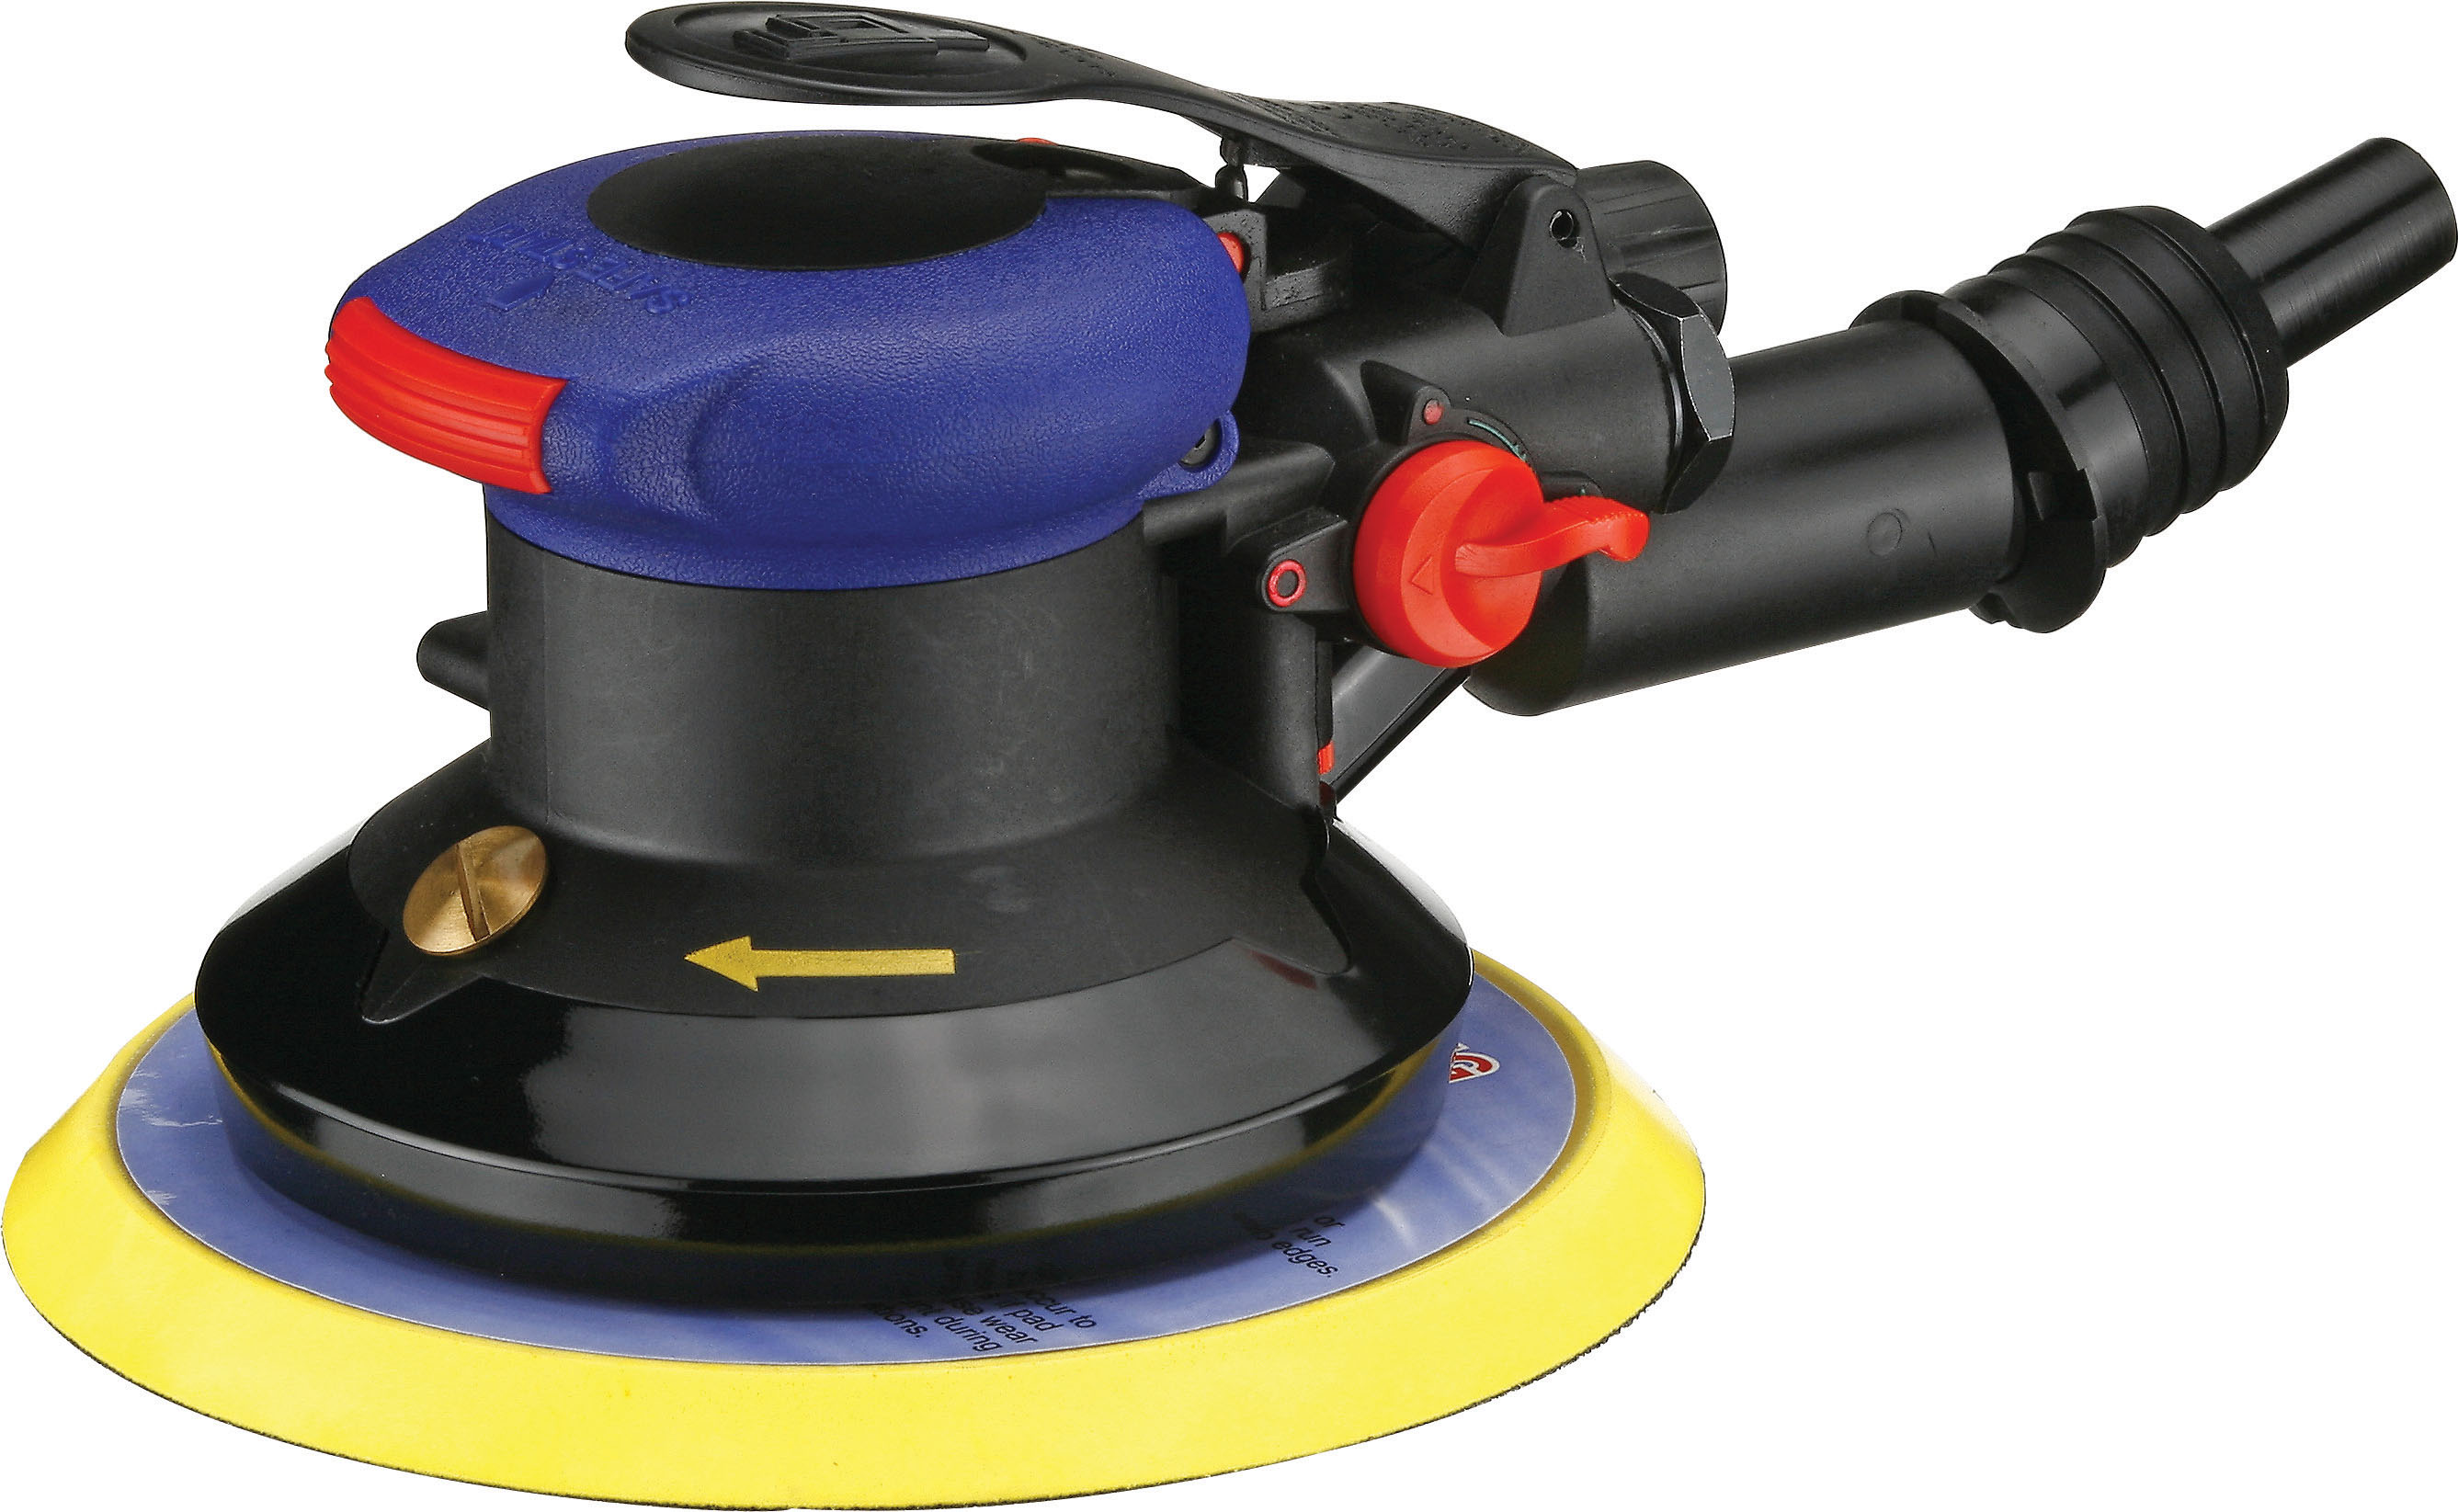 Gison’s Air Random Orbital Sander features greater safety, longer life and protection against fine dust.